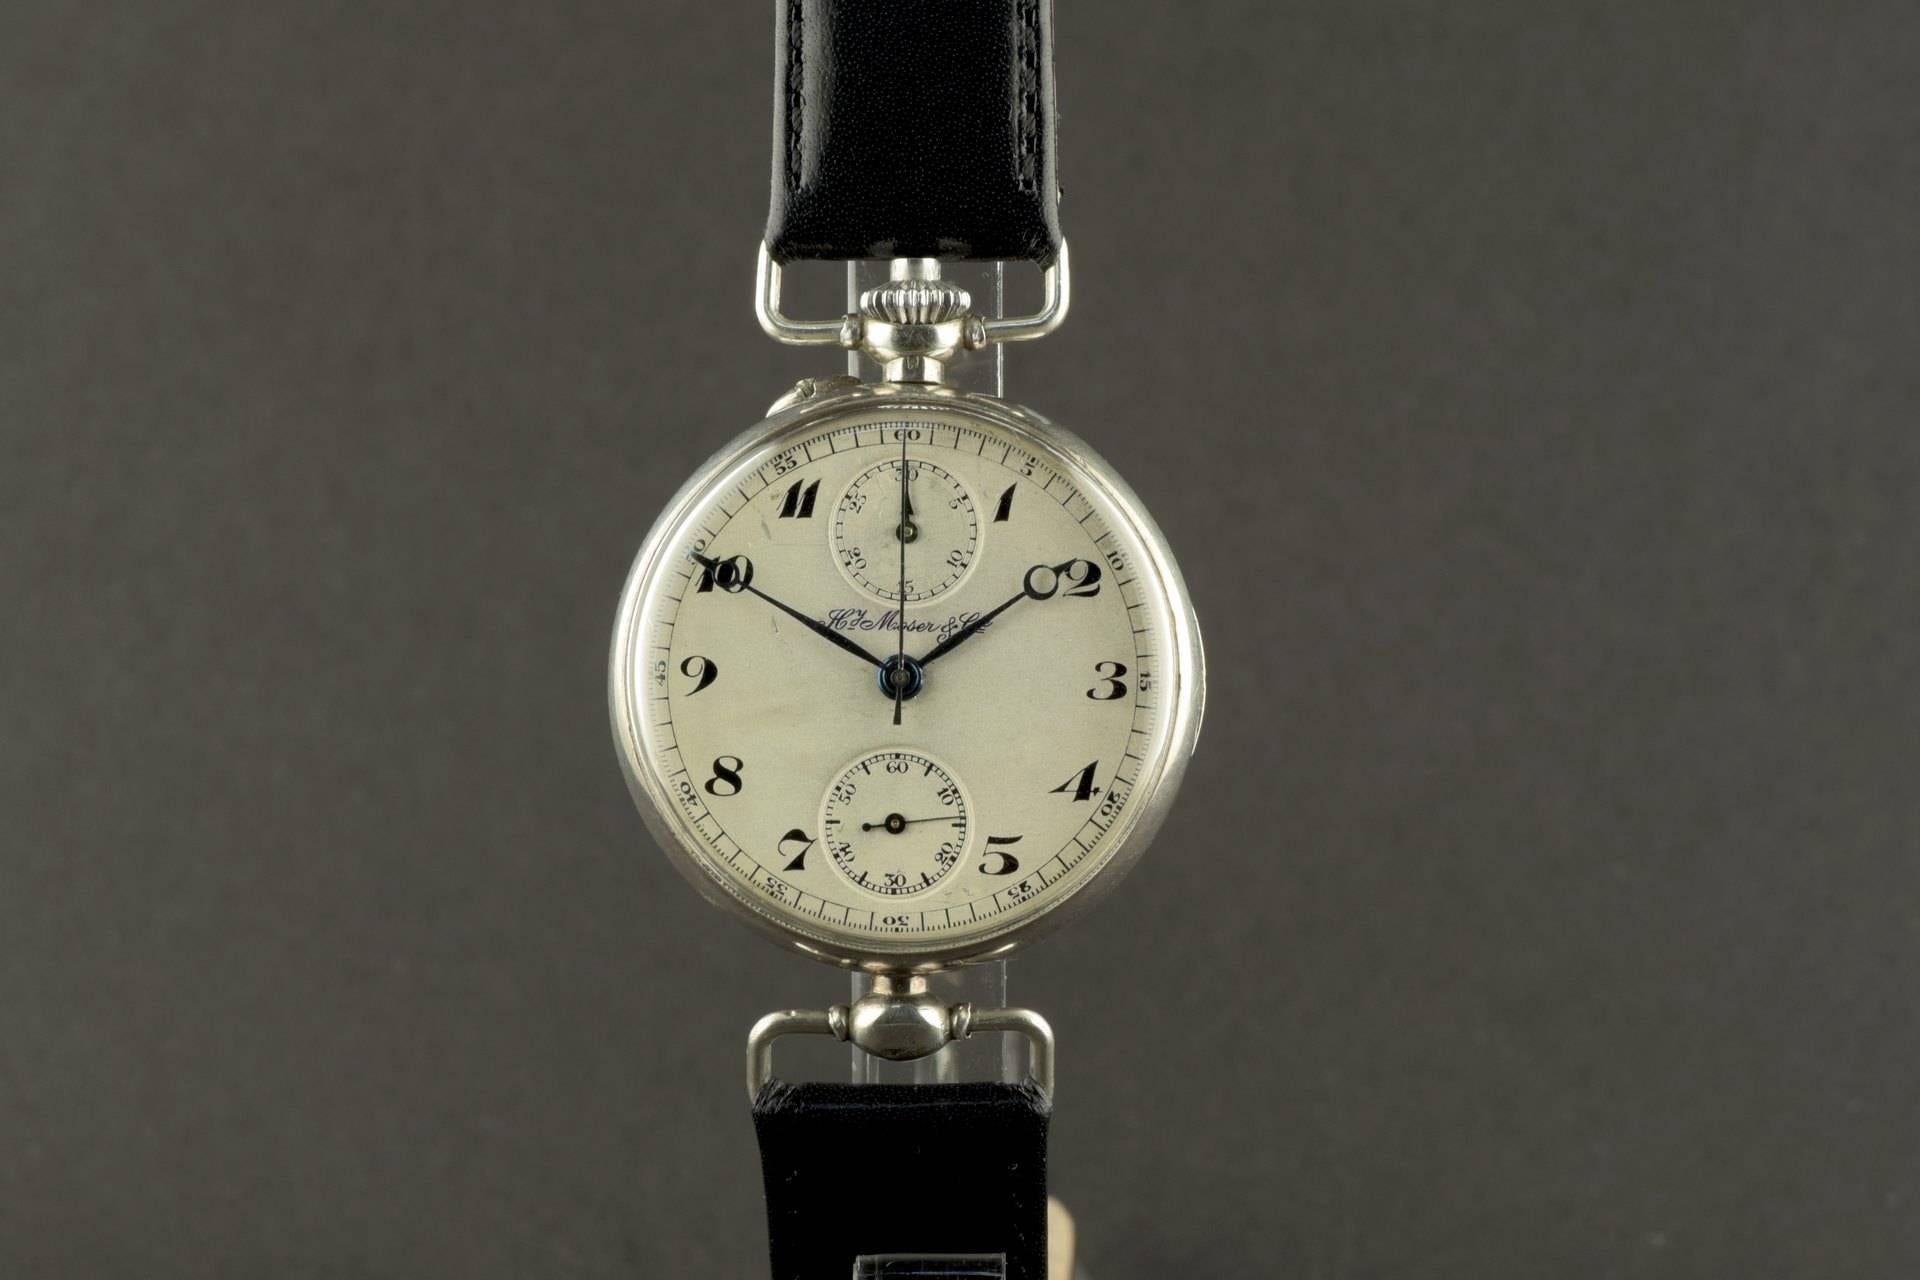 This chronograph by Henry Moser, Switzerland, produced around 1920 for the Russian market, provides a technical refinement. The minute counter of the chronograph 